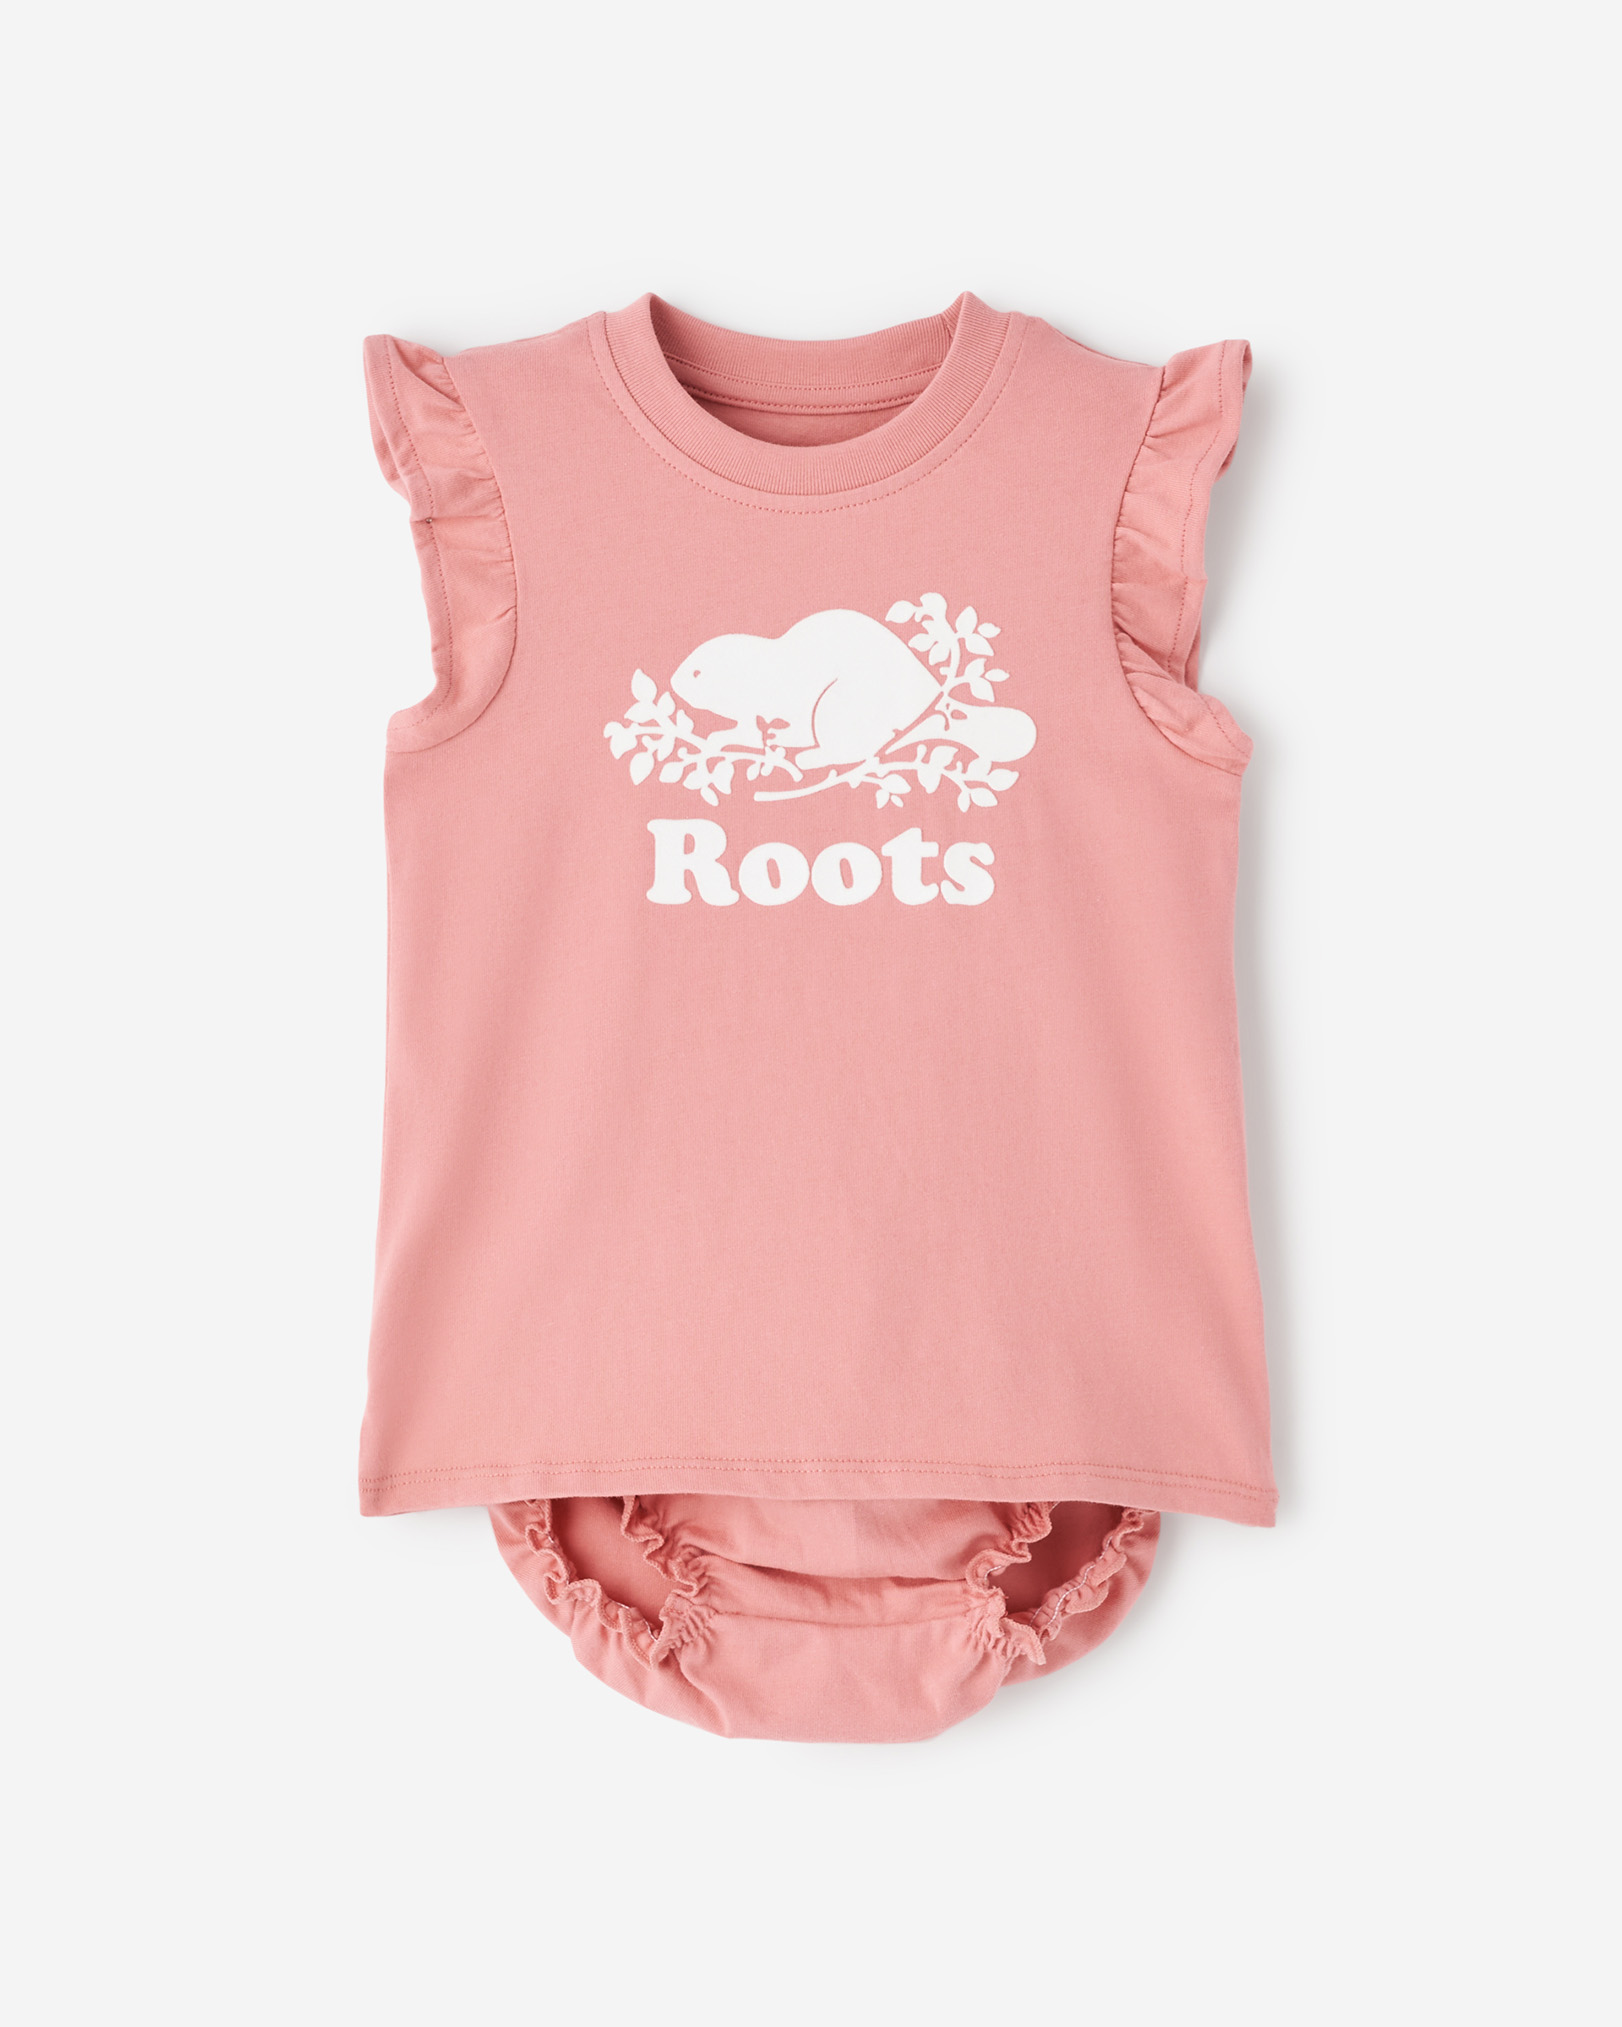 Roots Baby Cooper Dress in Mauveglow